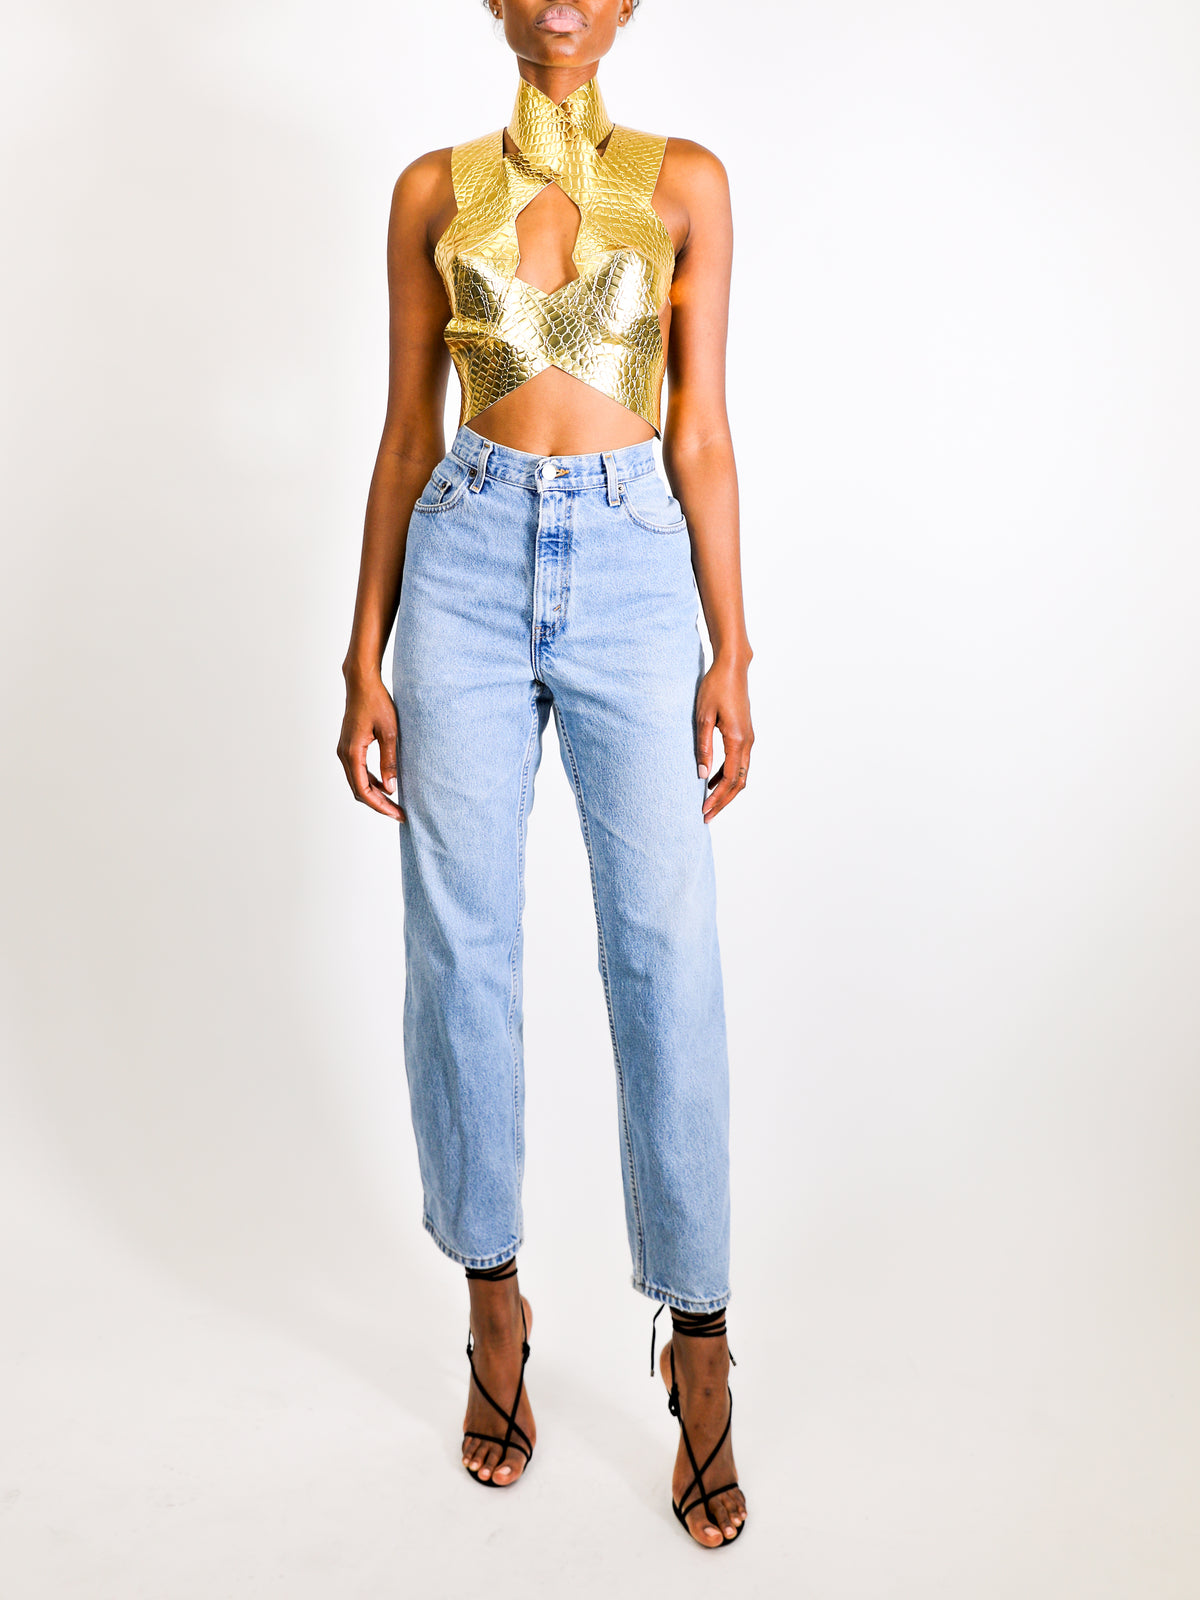 Model wears small Criss Cross Croc Top - Gold by GrayScale 